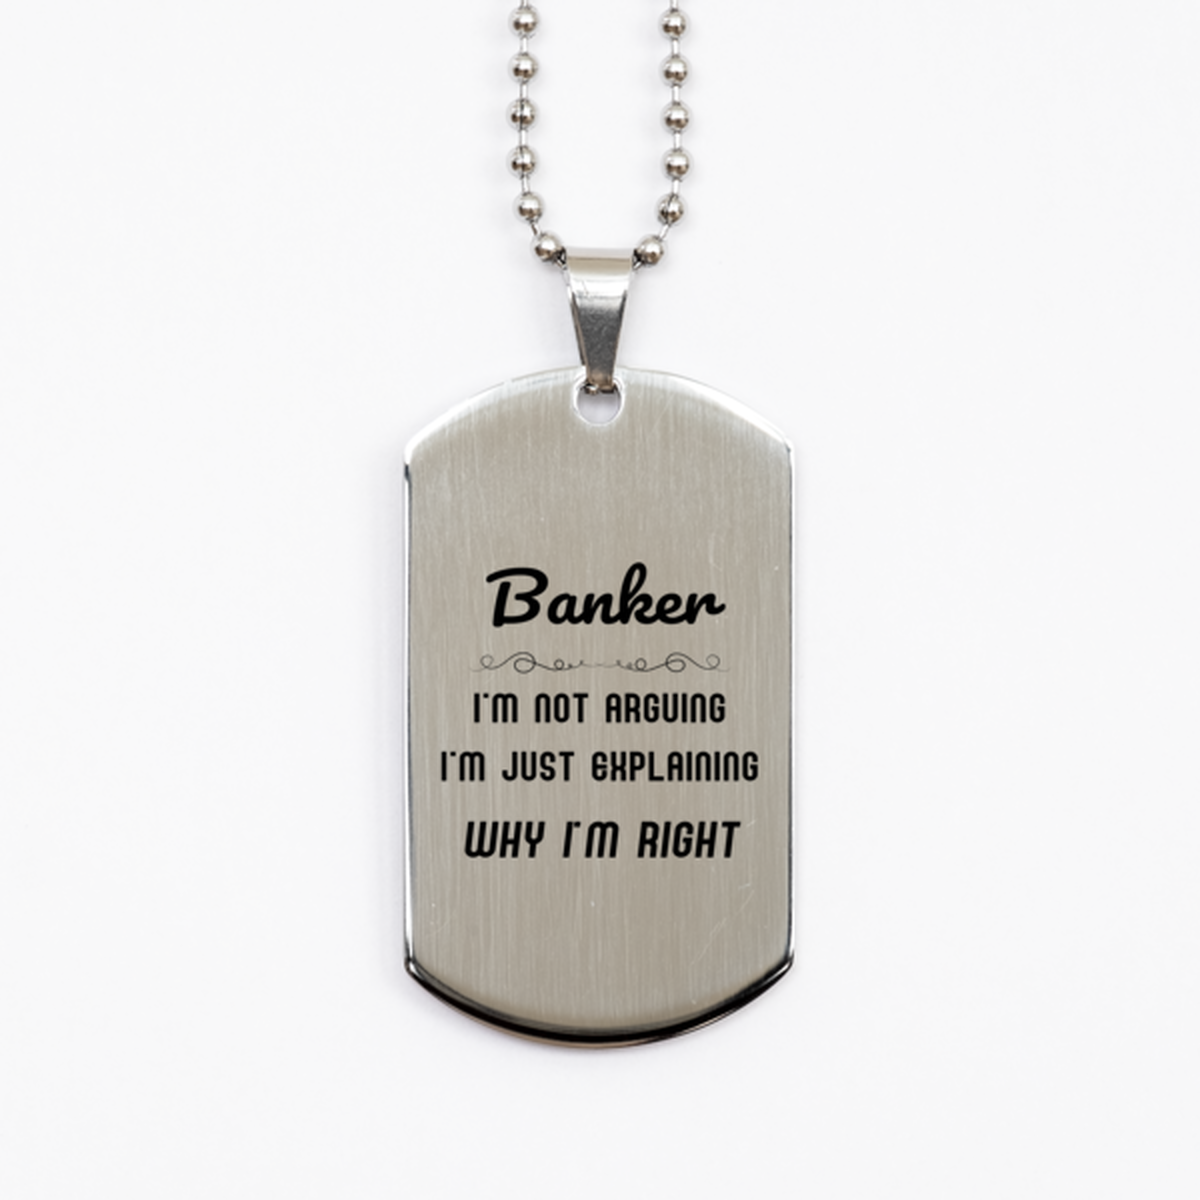 Banker I'm not Arguing. I'm Just Explaining Why I'm RIGHT Silver Dog Tag, Funny Saying Quote Banker Gifts For Banker Graduation Birthday Christmas Gifts for Men Women Coworker